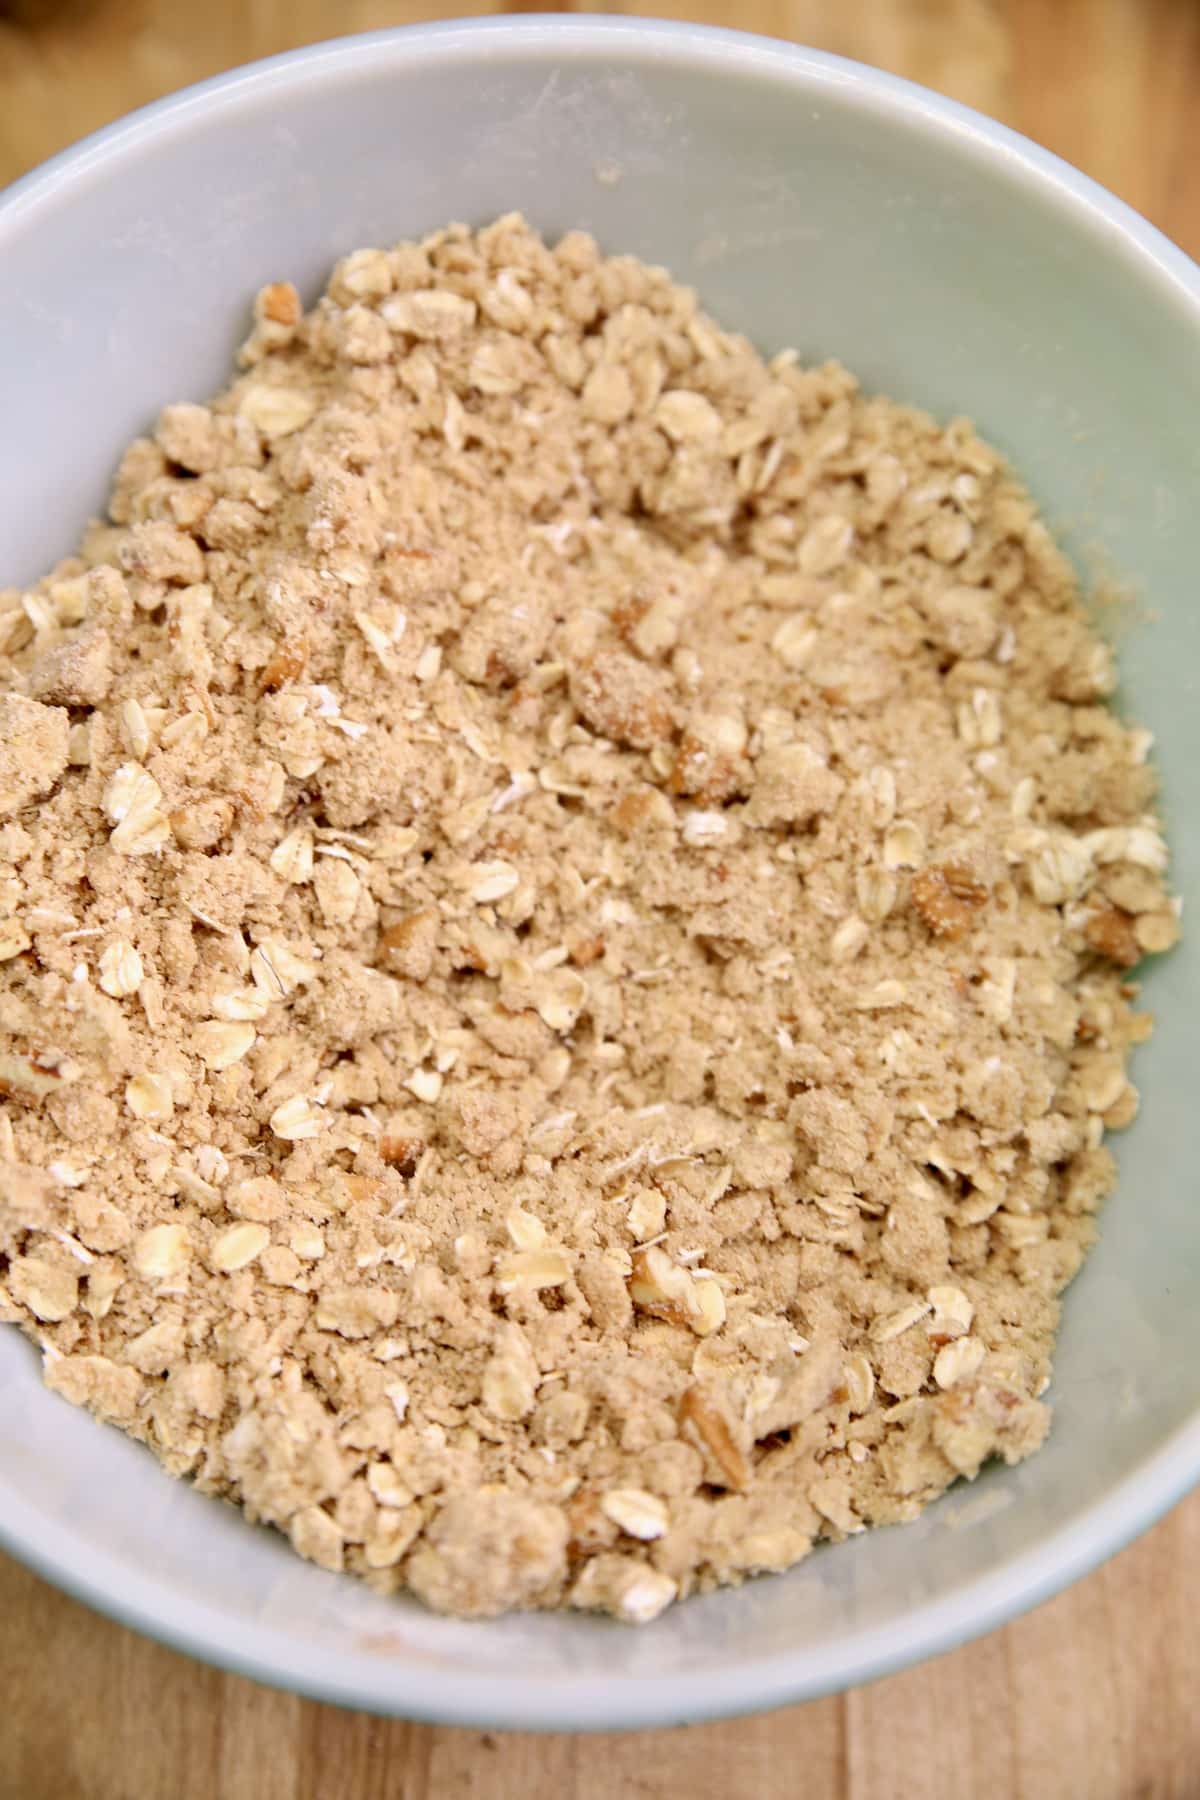 Oat and brown sugar topping for fruit crisp in a bowl.